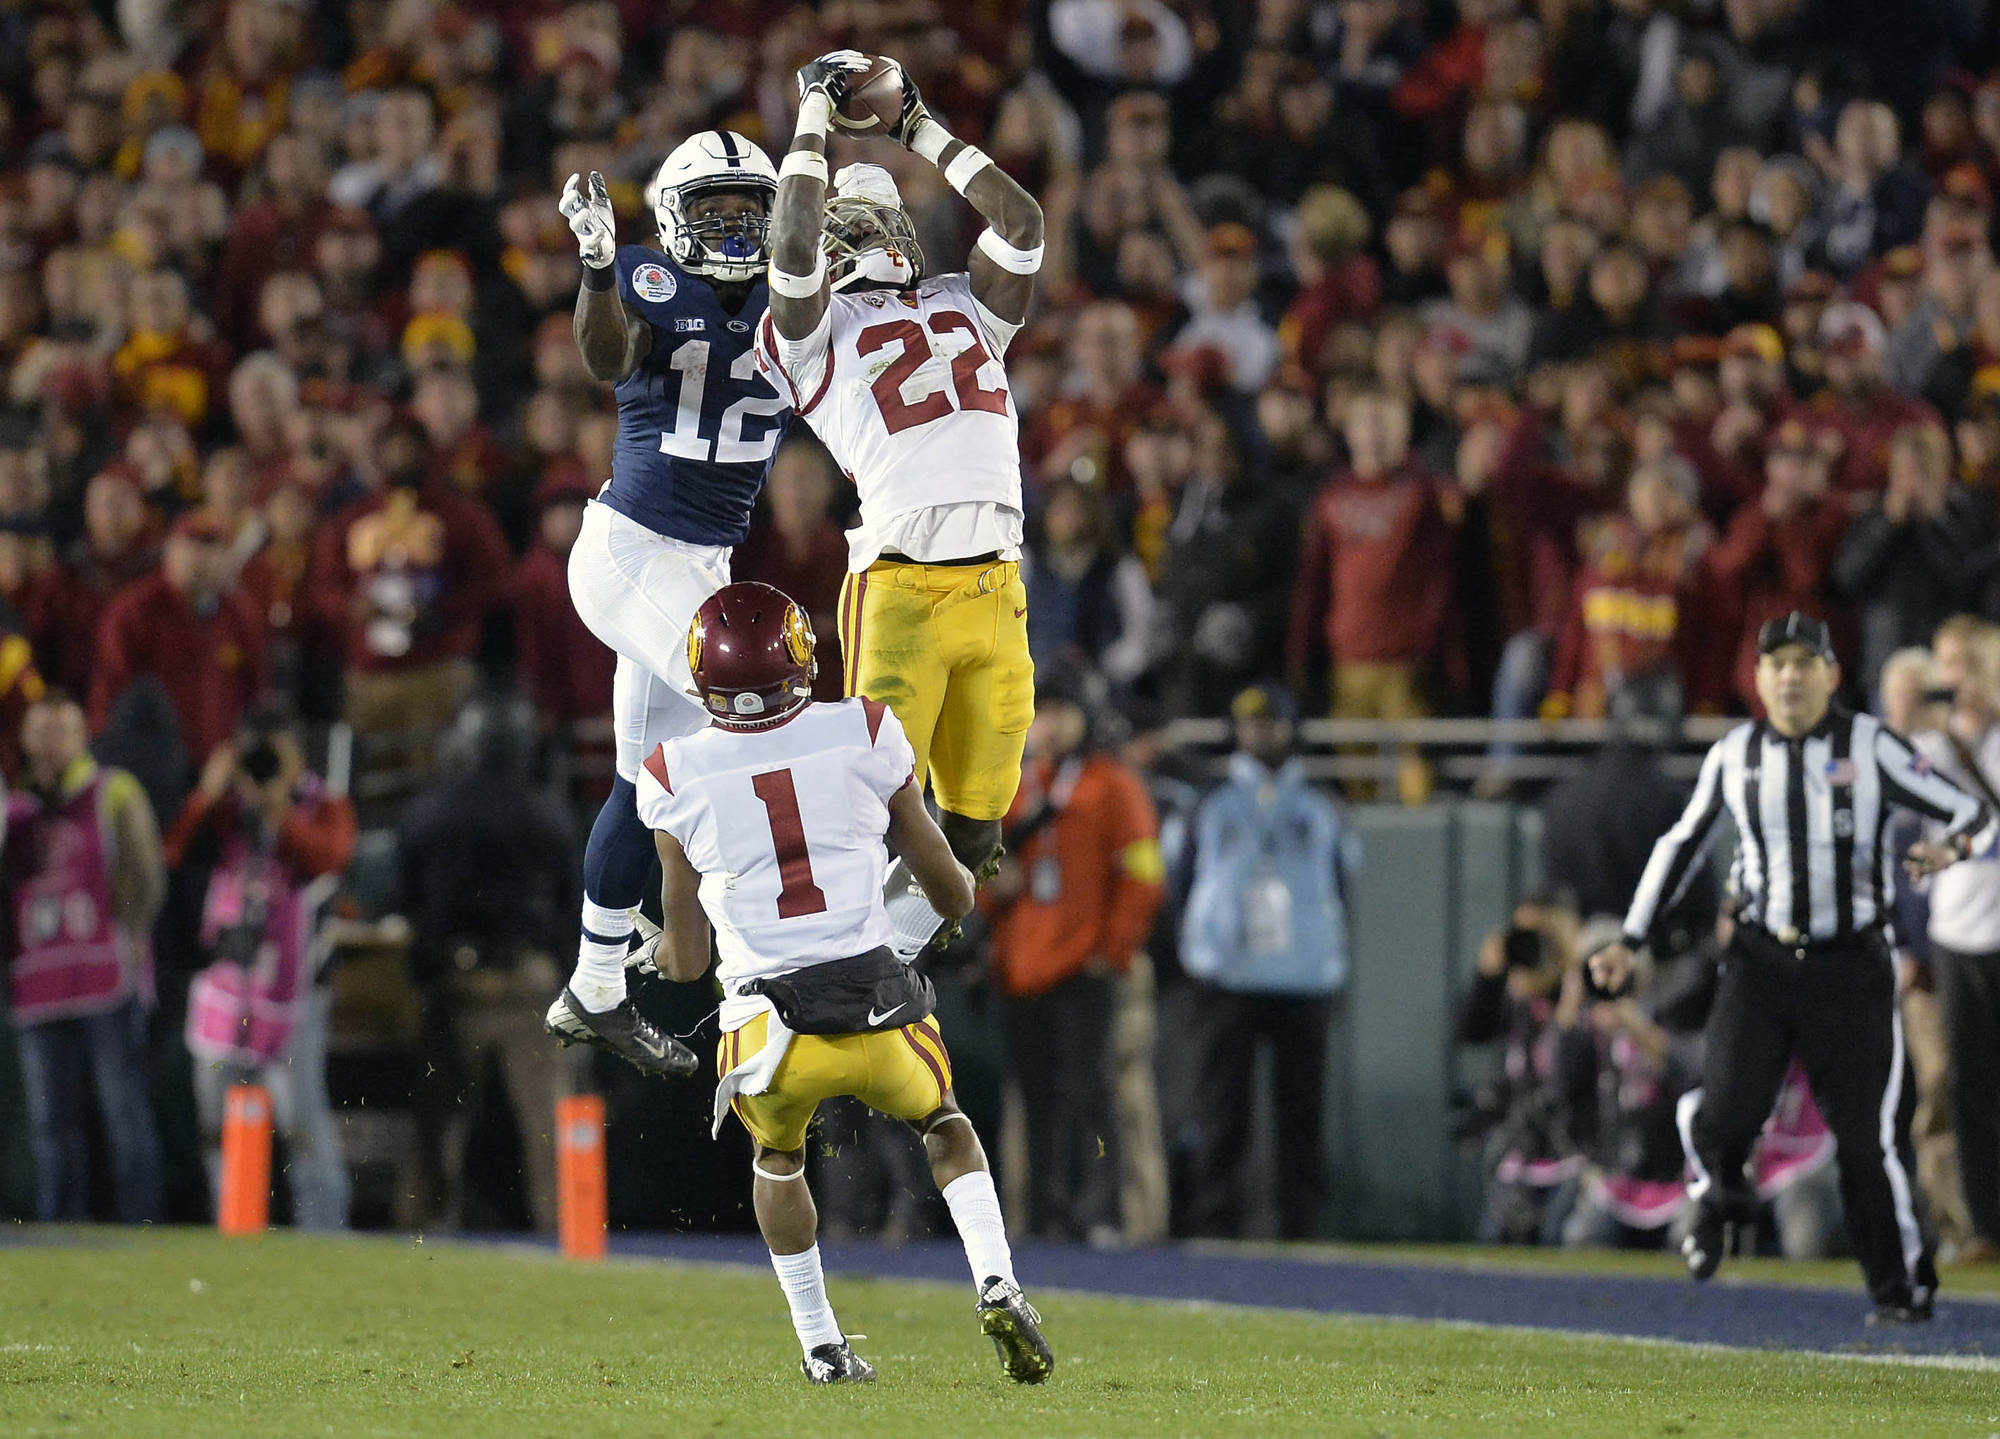 Classic Rose Bowl proves how great college football can be